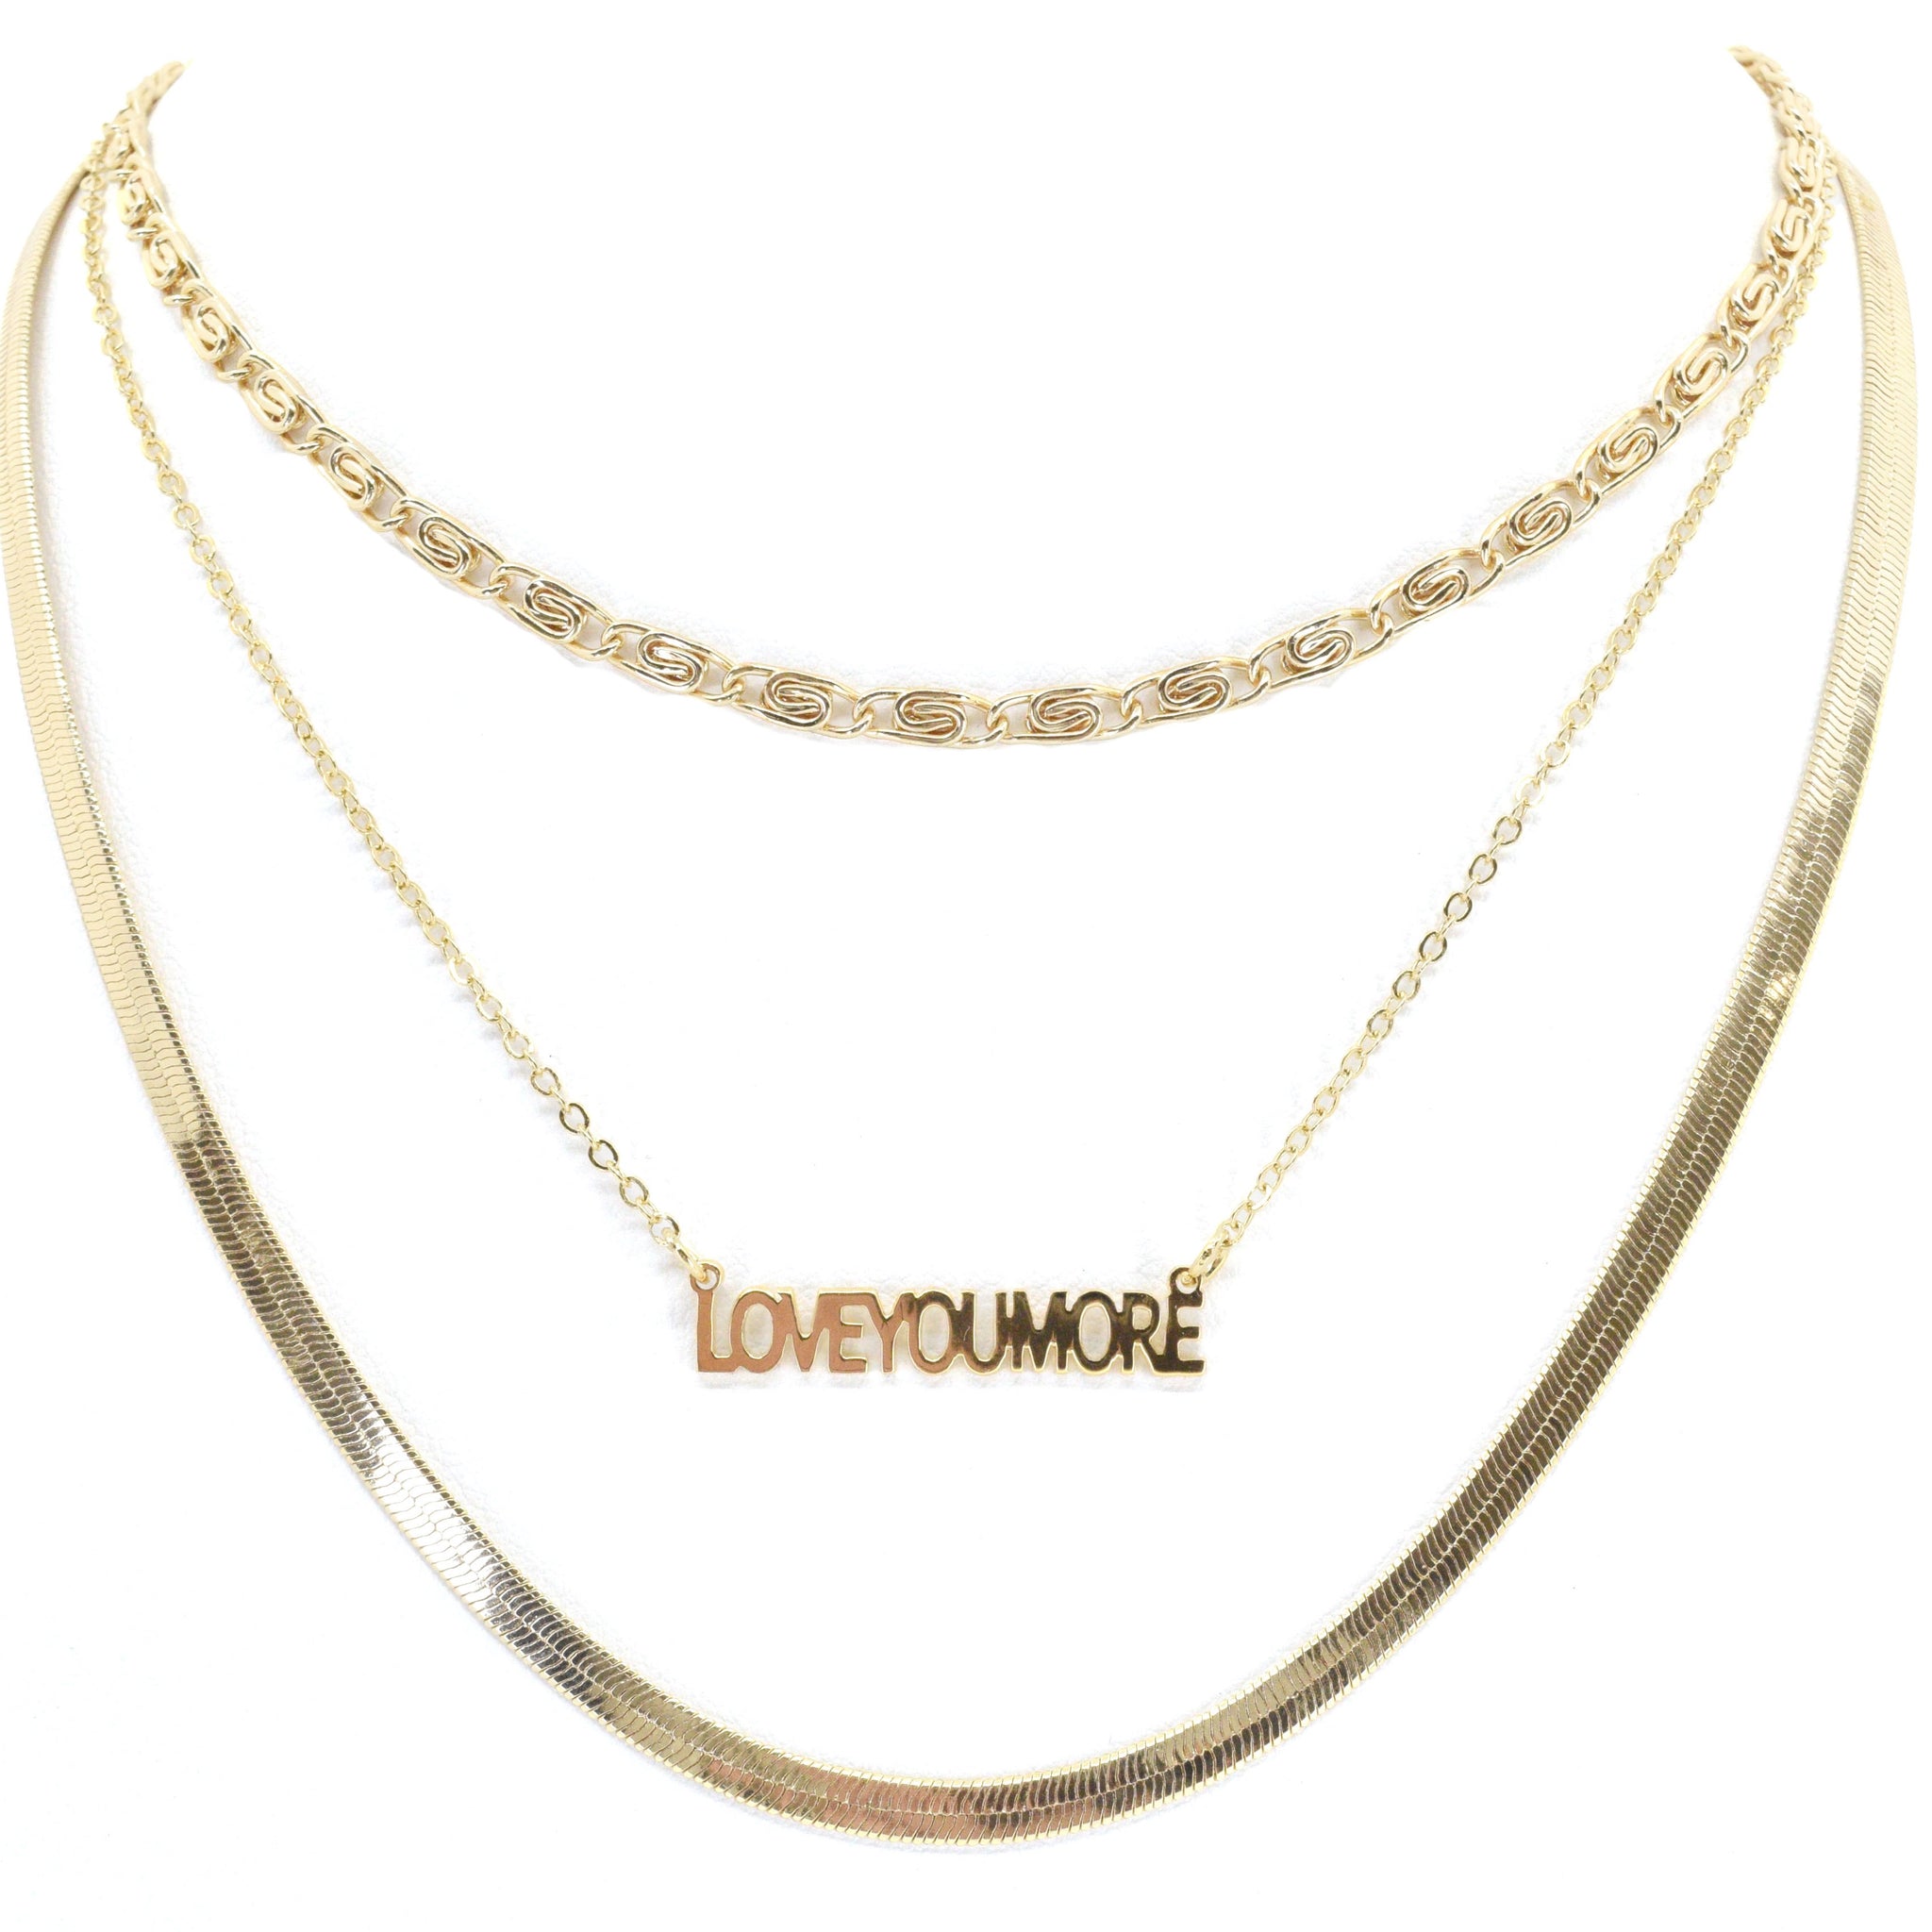 Gold Layered Necklace Set #2 - Save 20%!